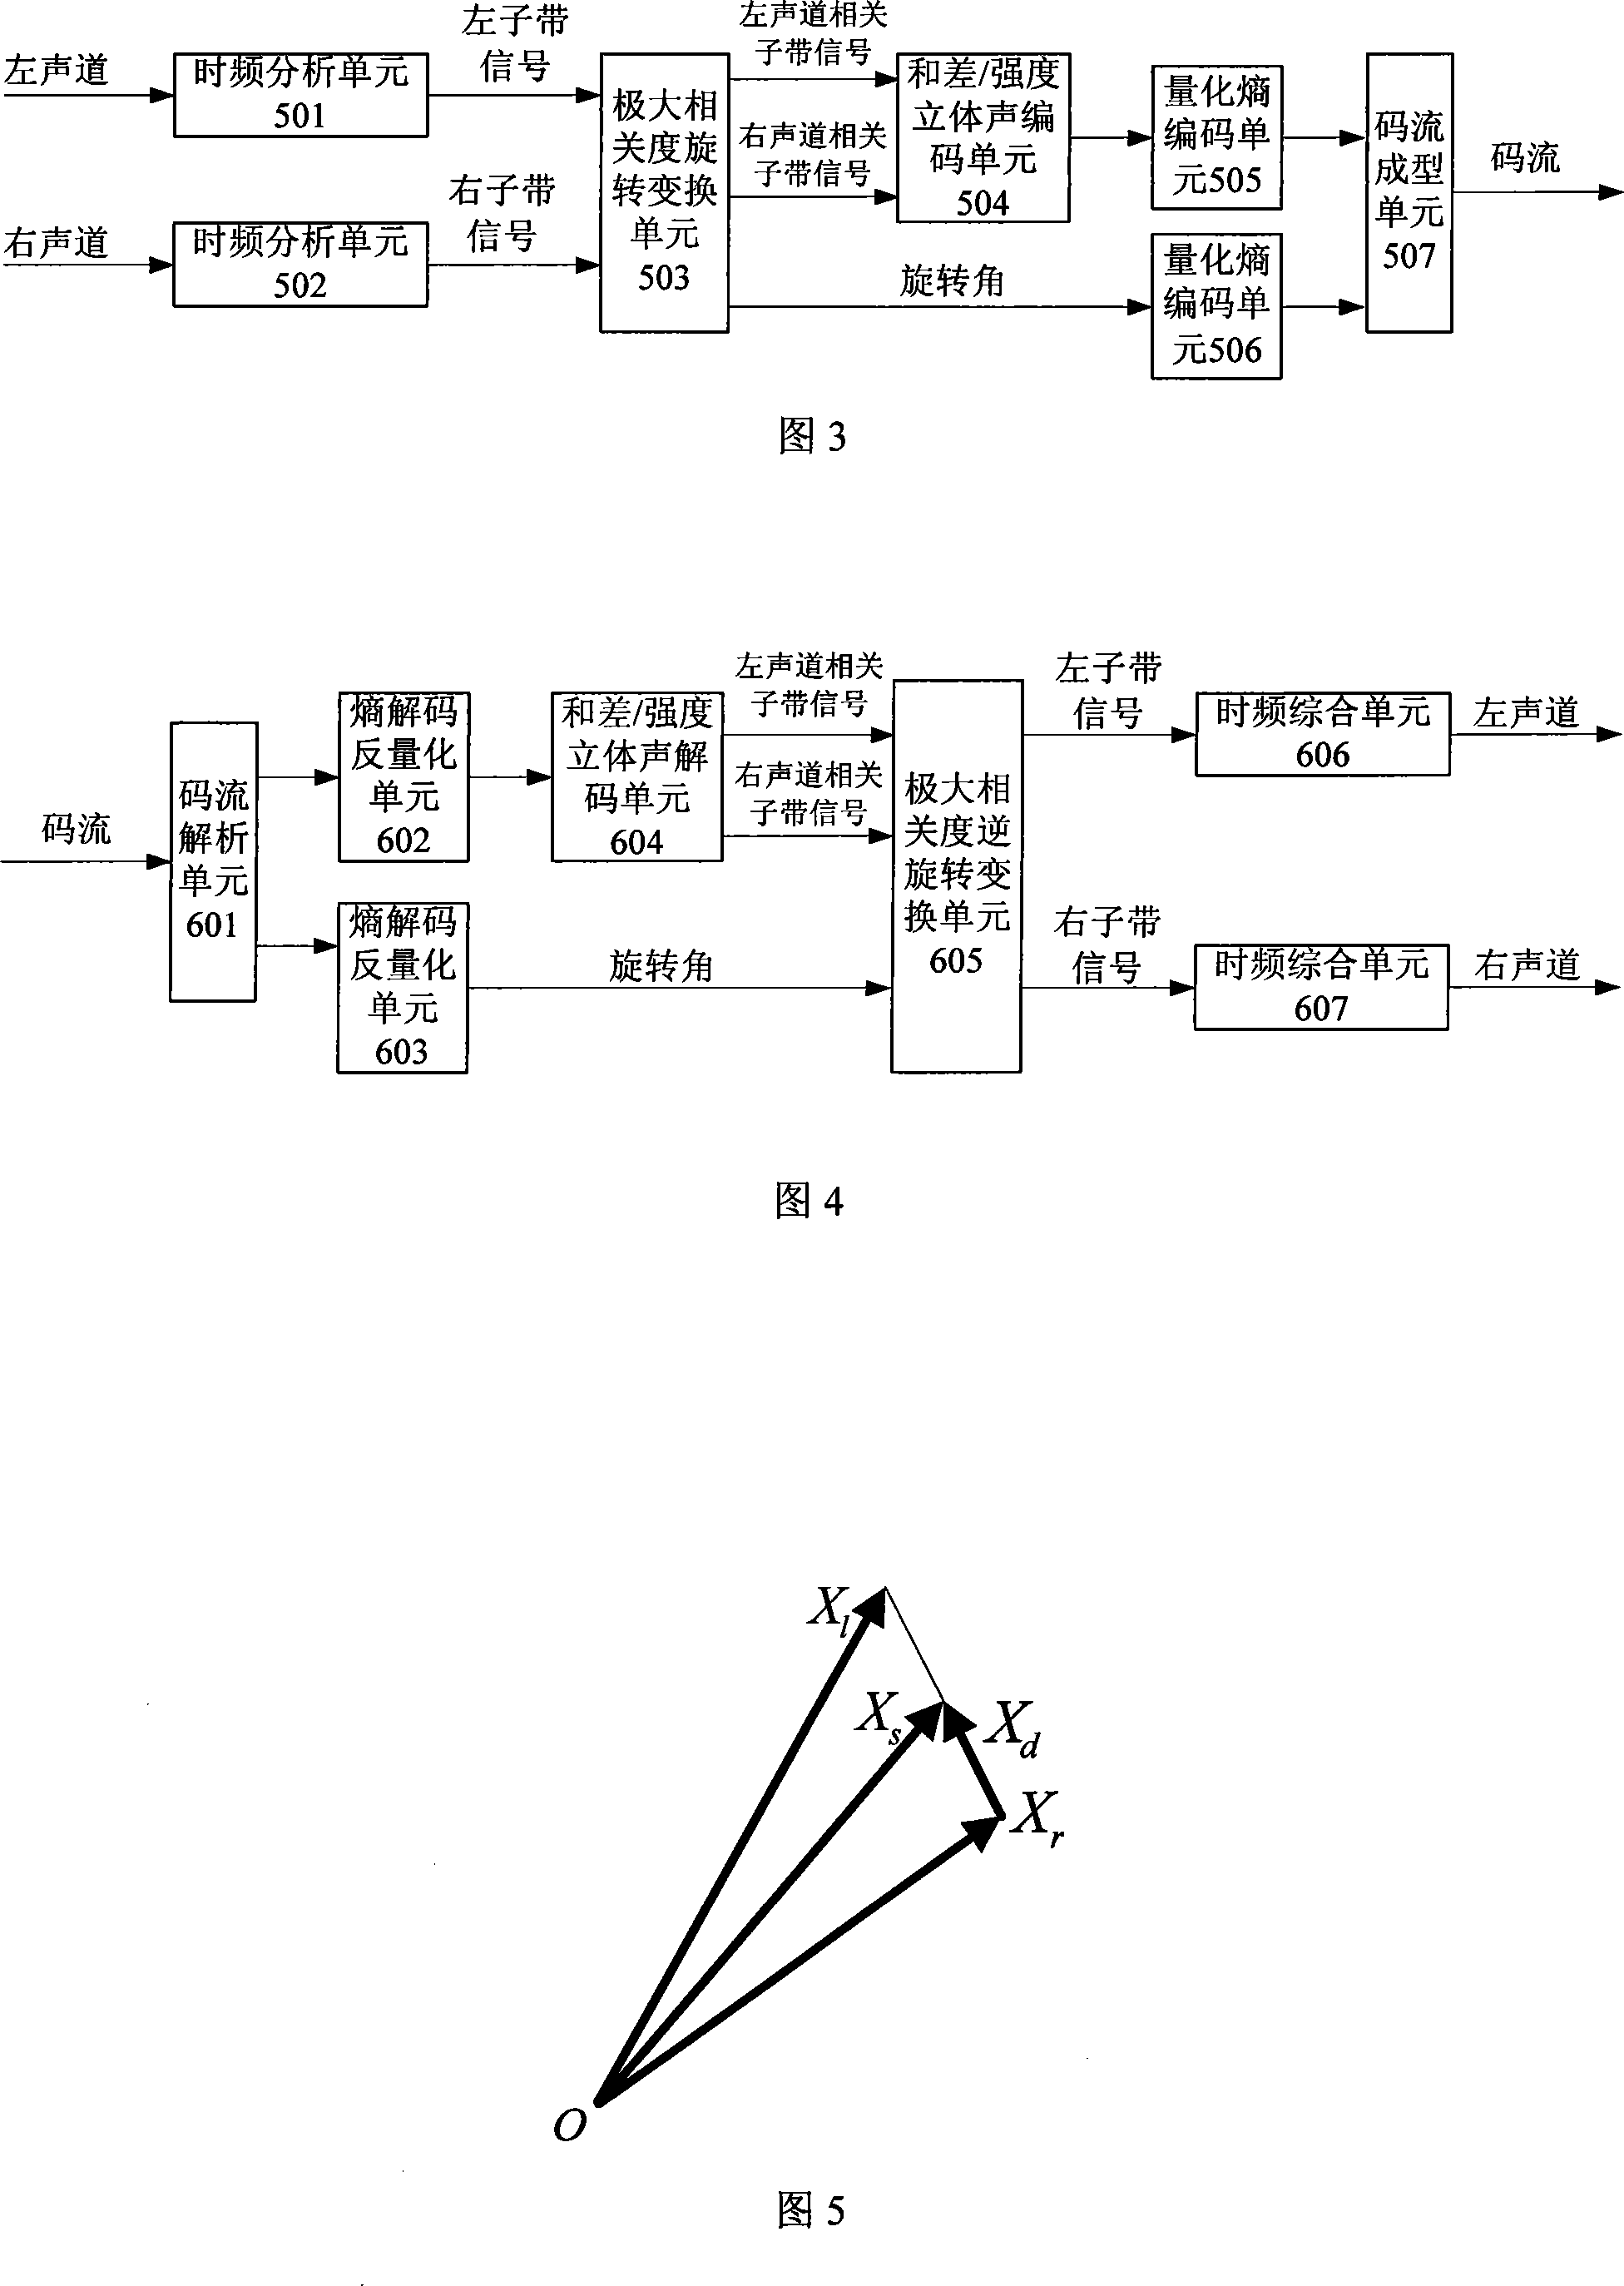 Method and system for encoding and decoding audio signal